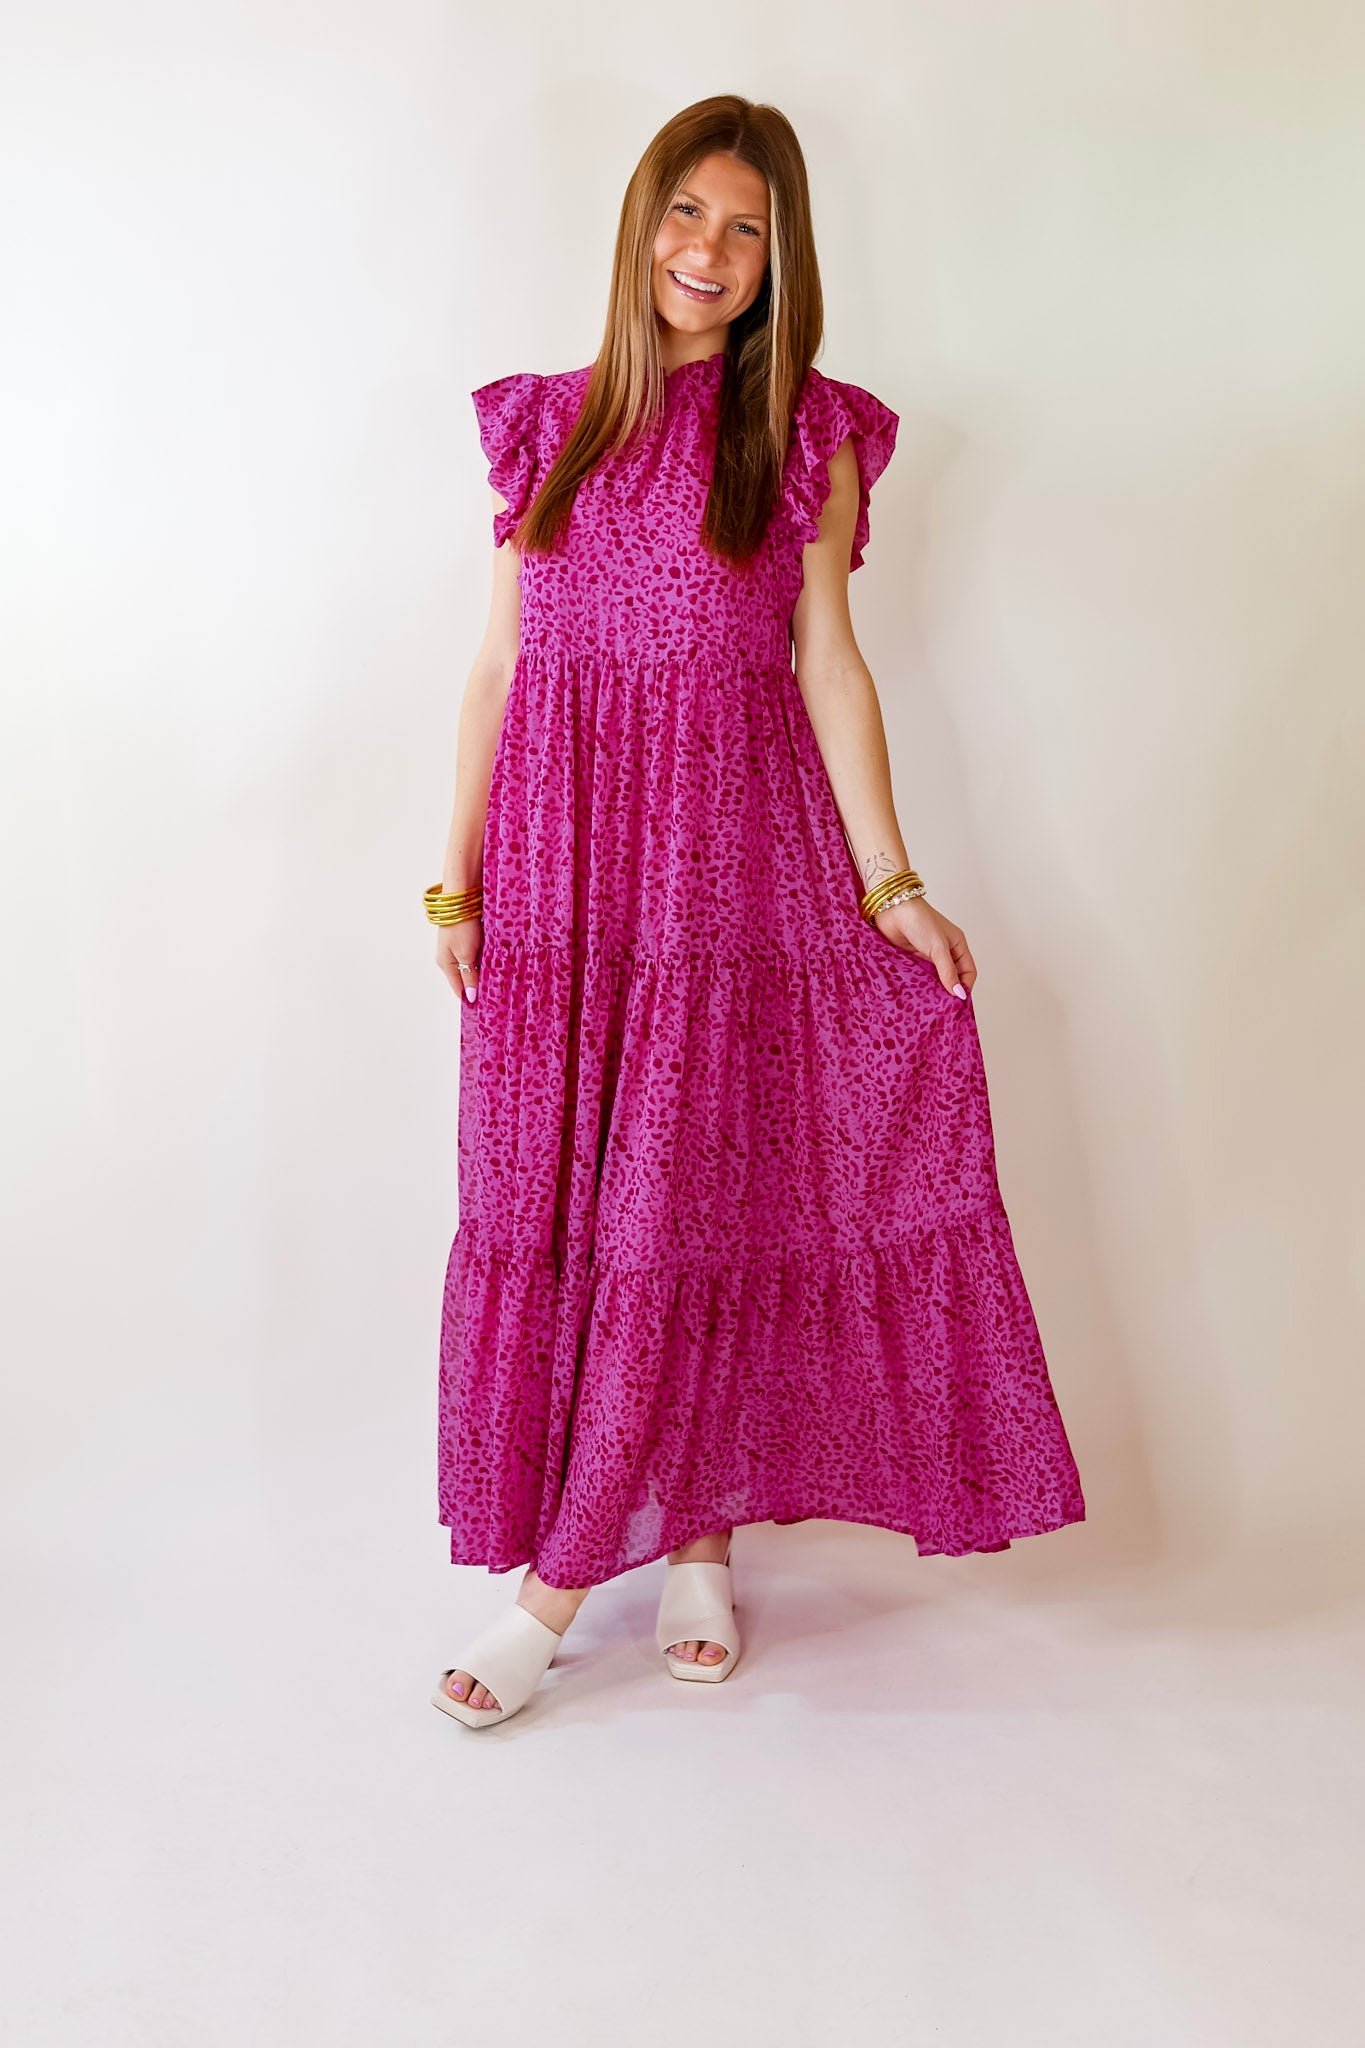 Settle The Score Leopard Print Maxi Dress in Magenta Pink - Giddy Up Glamour Boutique